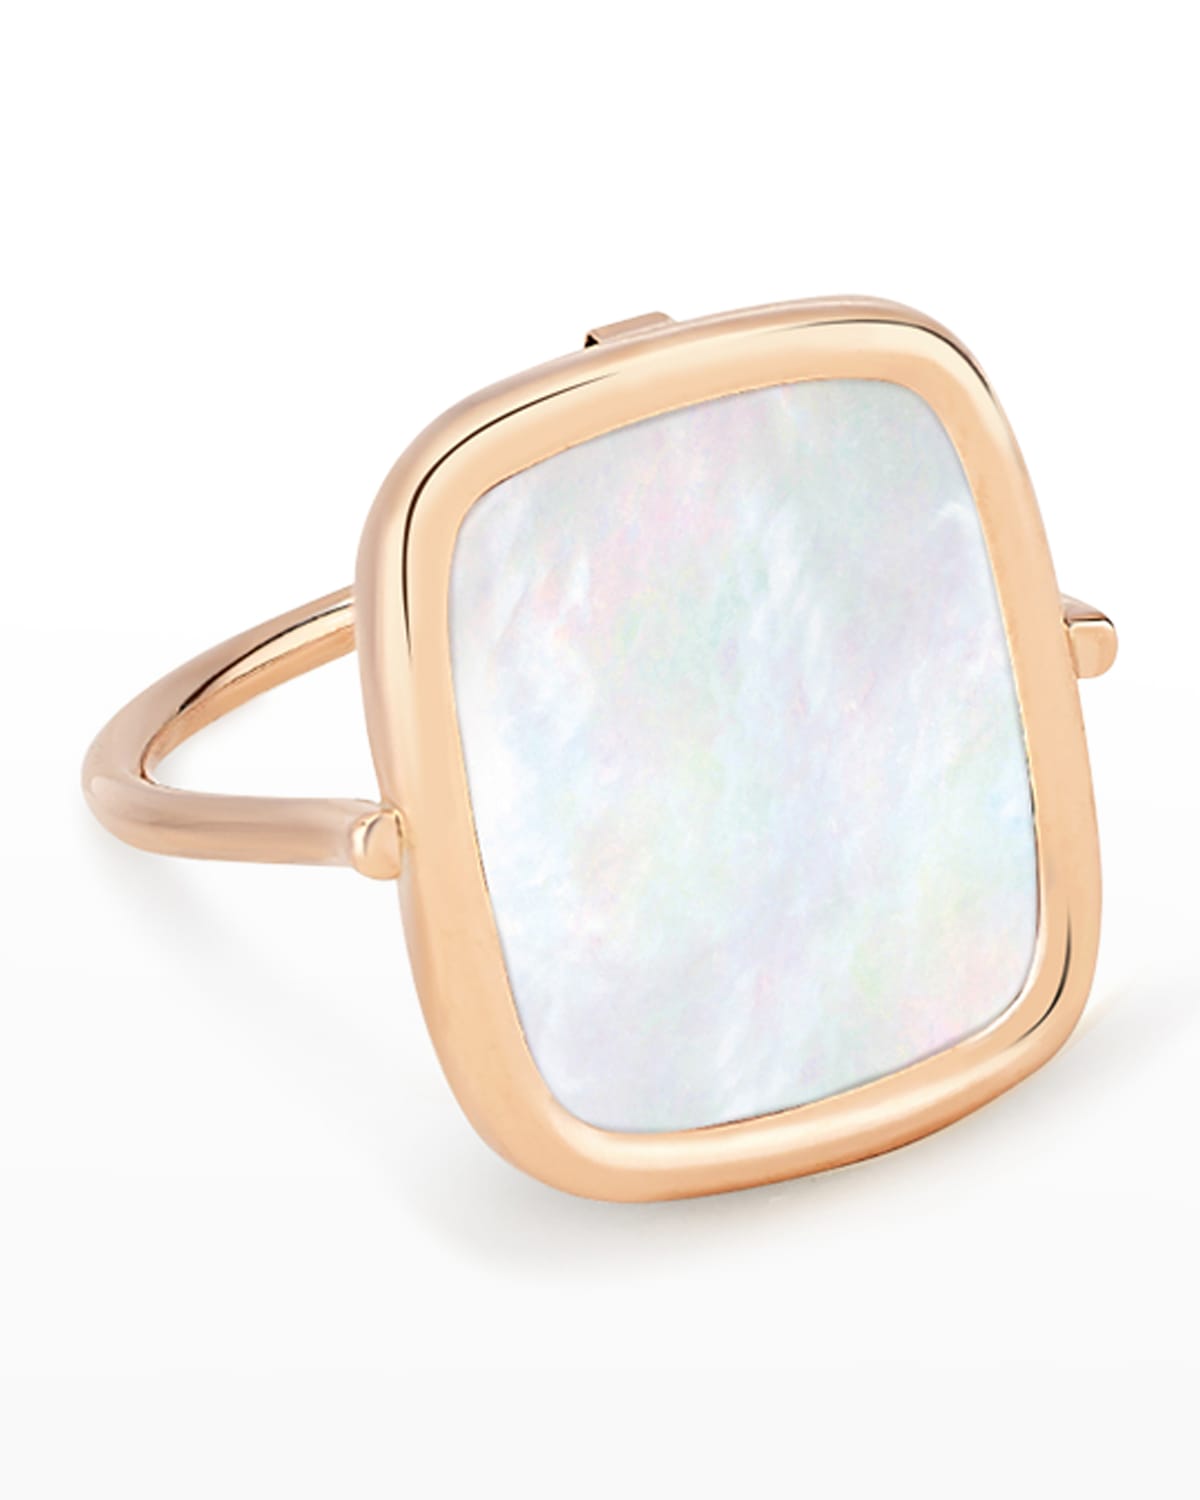 GINETTE NY ROSE GOLD WHITE MOTHER-OF-PEARL ANTIQUED RING